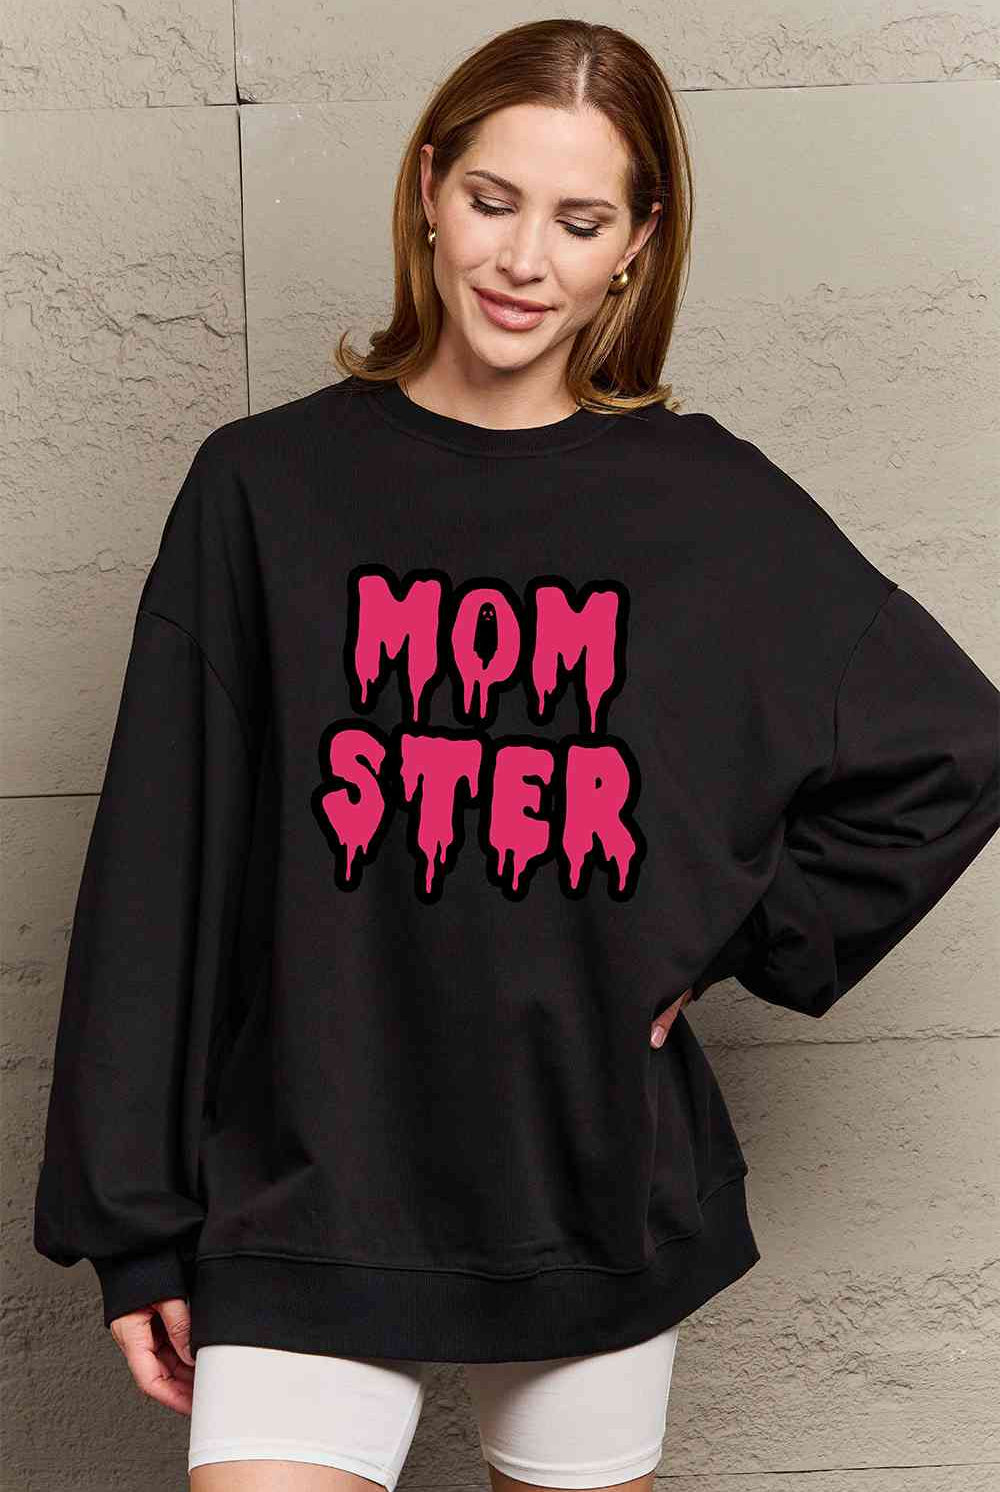 Simply Love Full Size MOM STER Graphic Sweatshirt - GemThreads Boutique